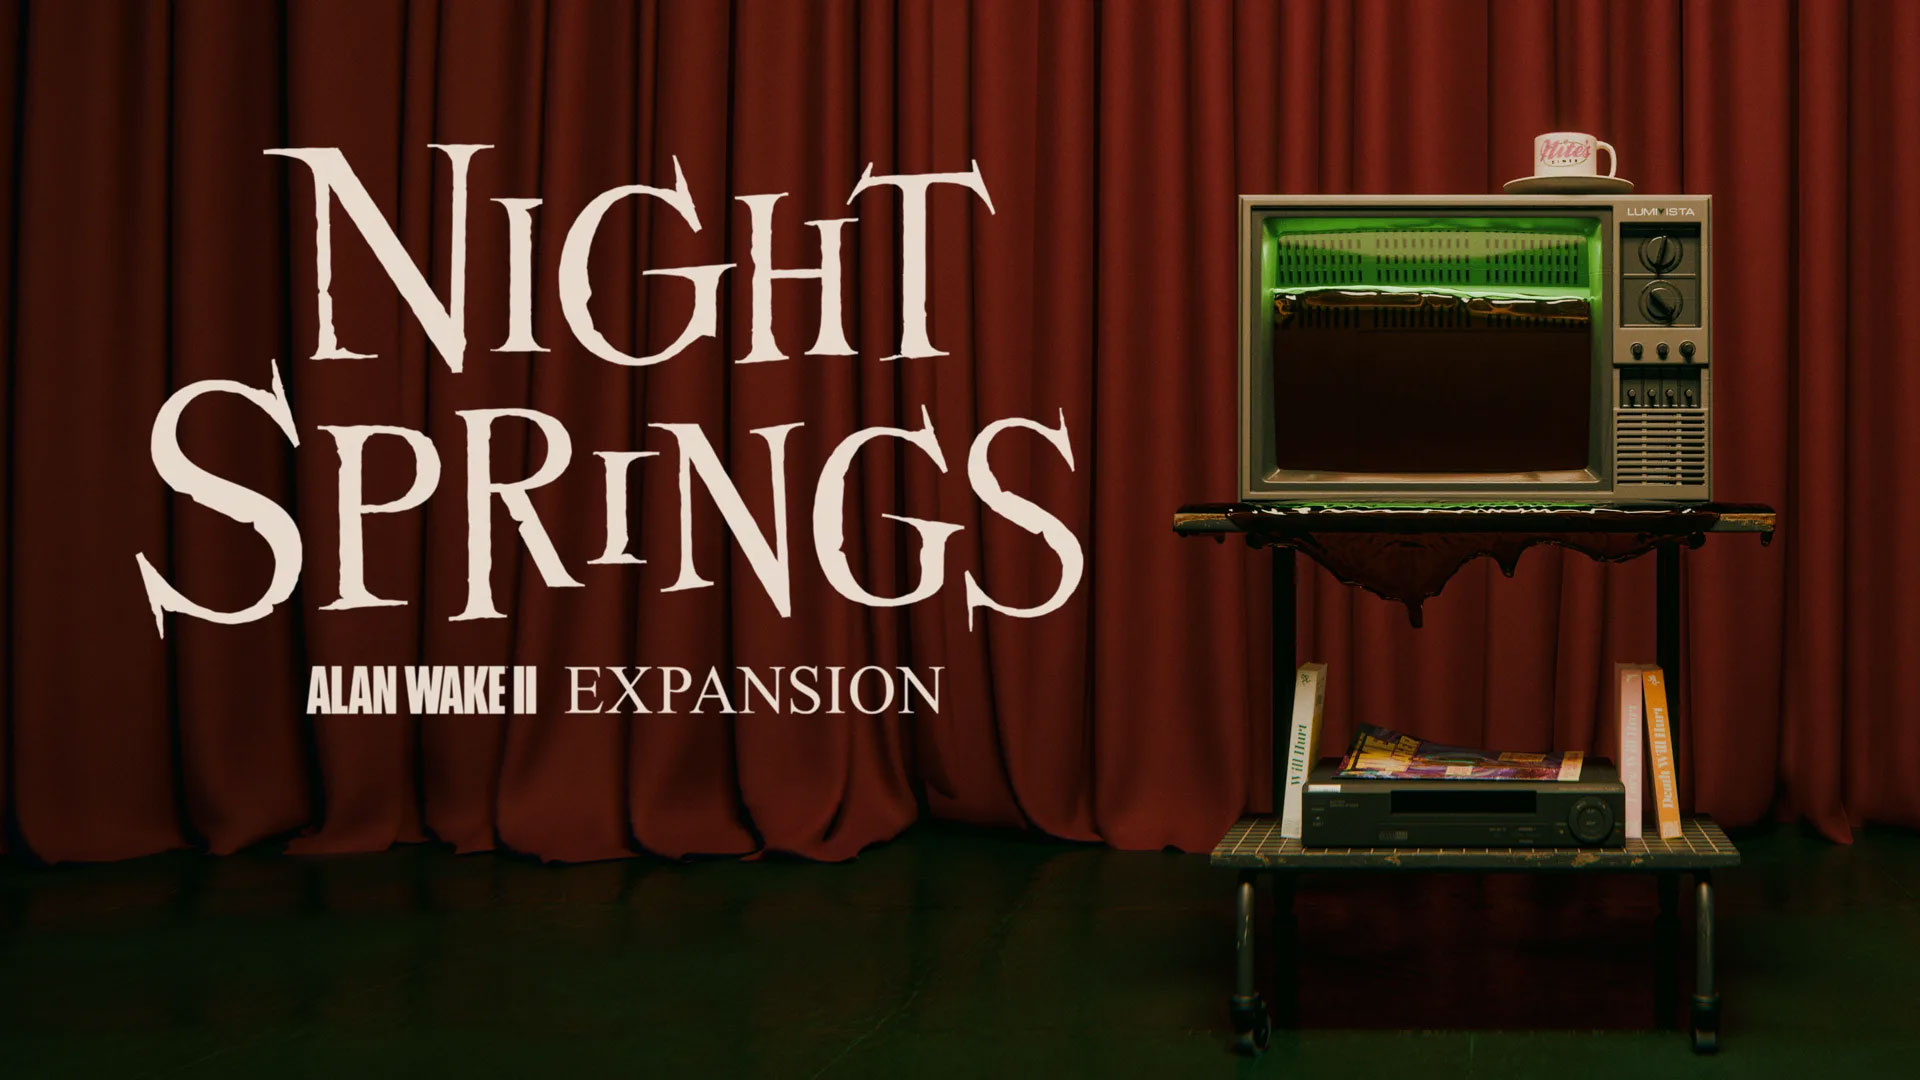 Night Springs launches tomorrow, June 8